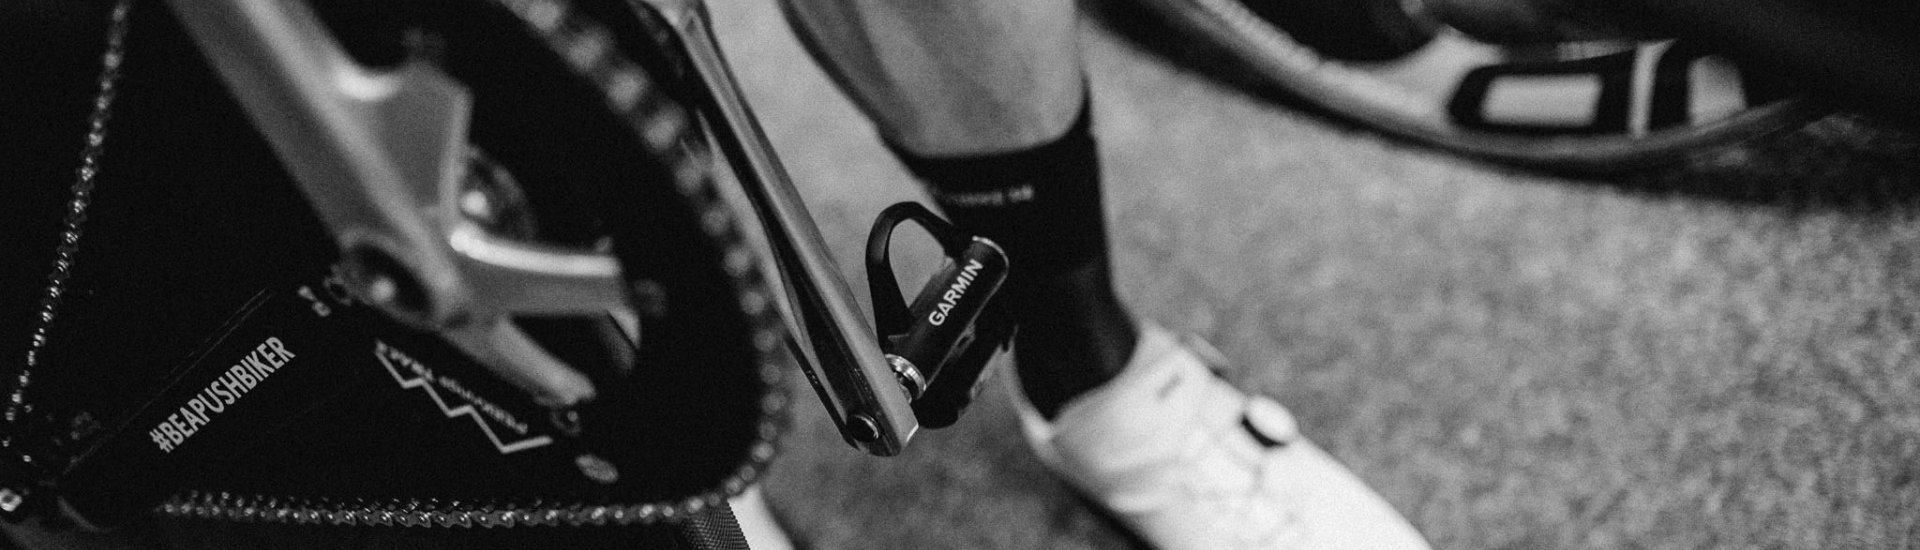 The Garmin Vector 3 pedals in Glasgow at a track race.